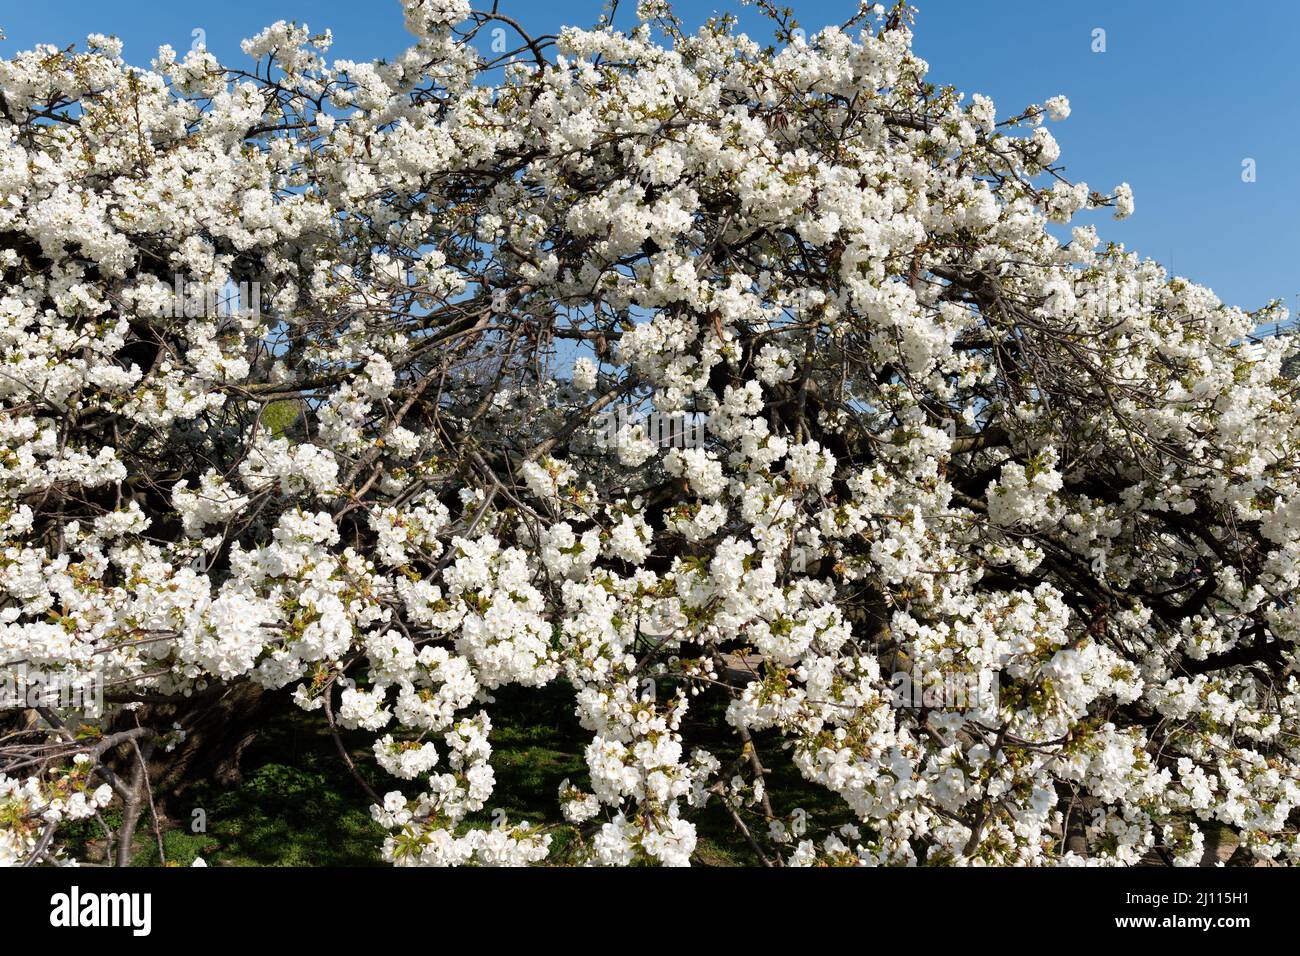 Cherry tree with white flowers in full bloom in the Jardin des Plantes in Paris Stock Photo